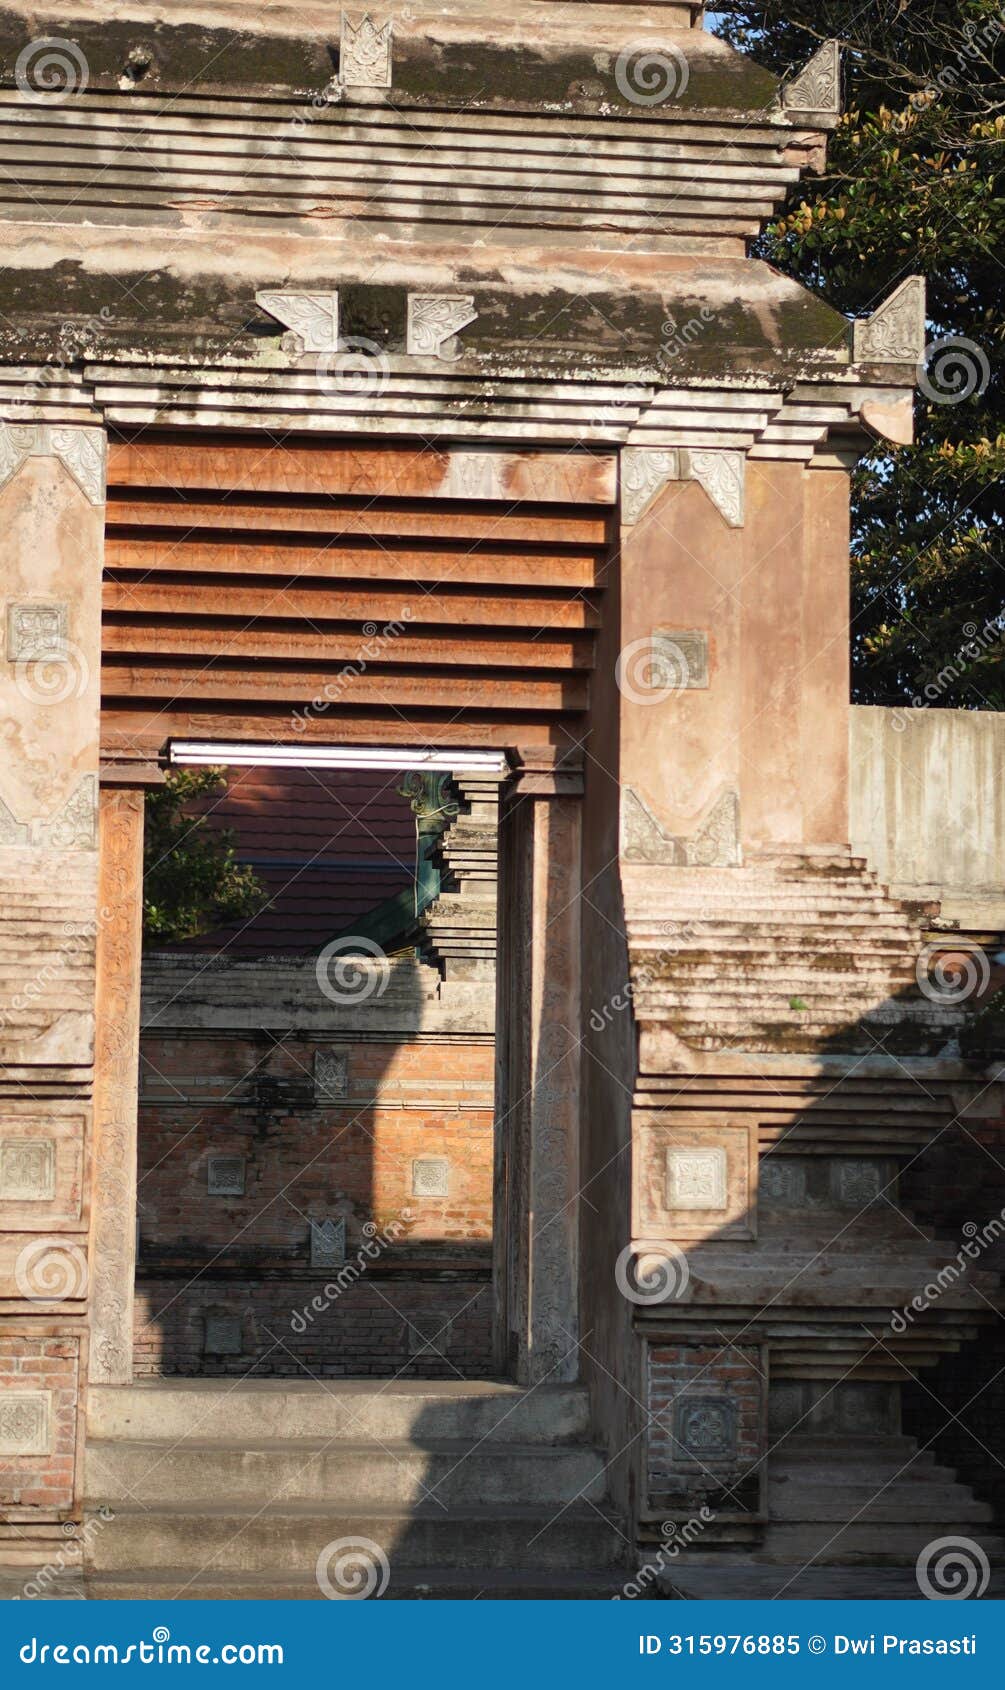 an ornate gate at a cultural heritage cemetery in yogyakarta, made from red brick